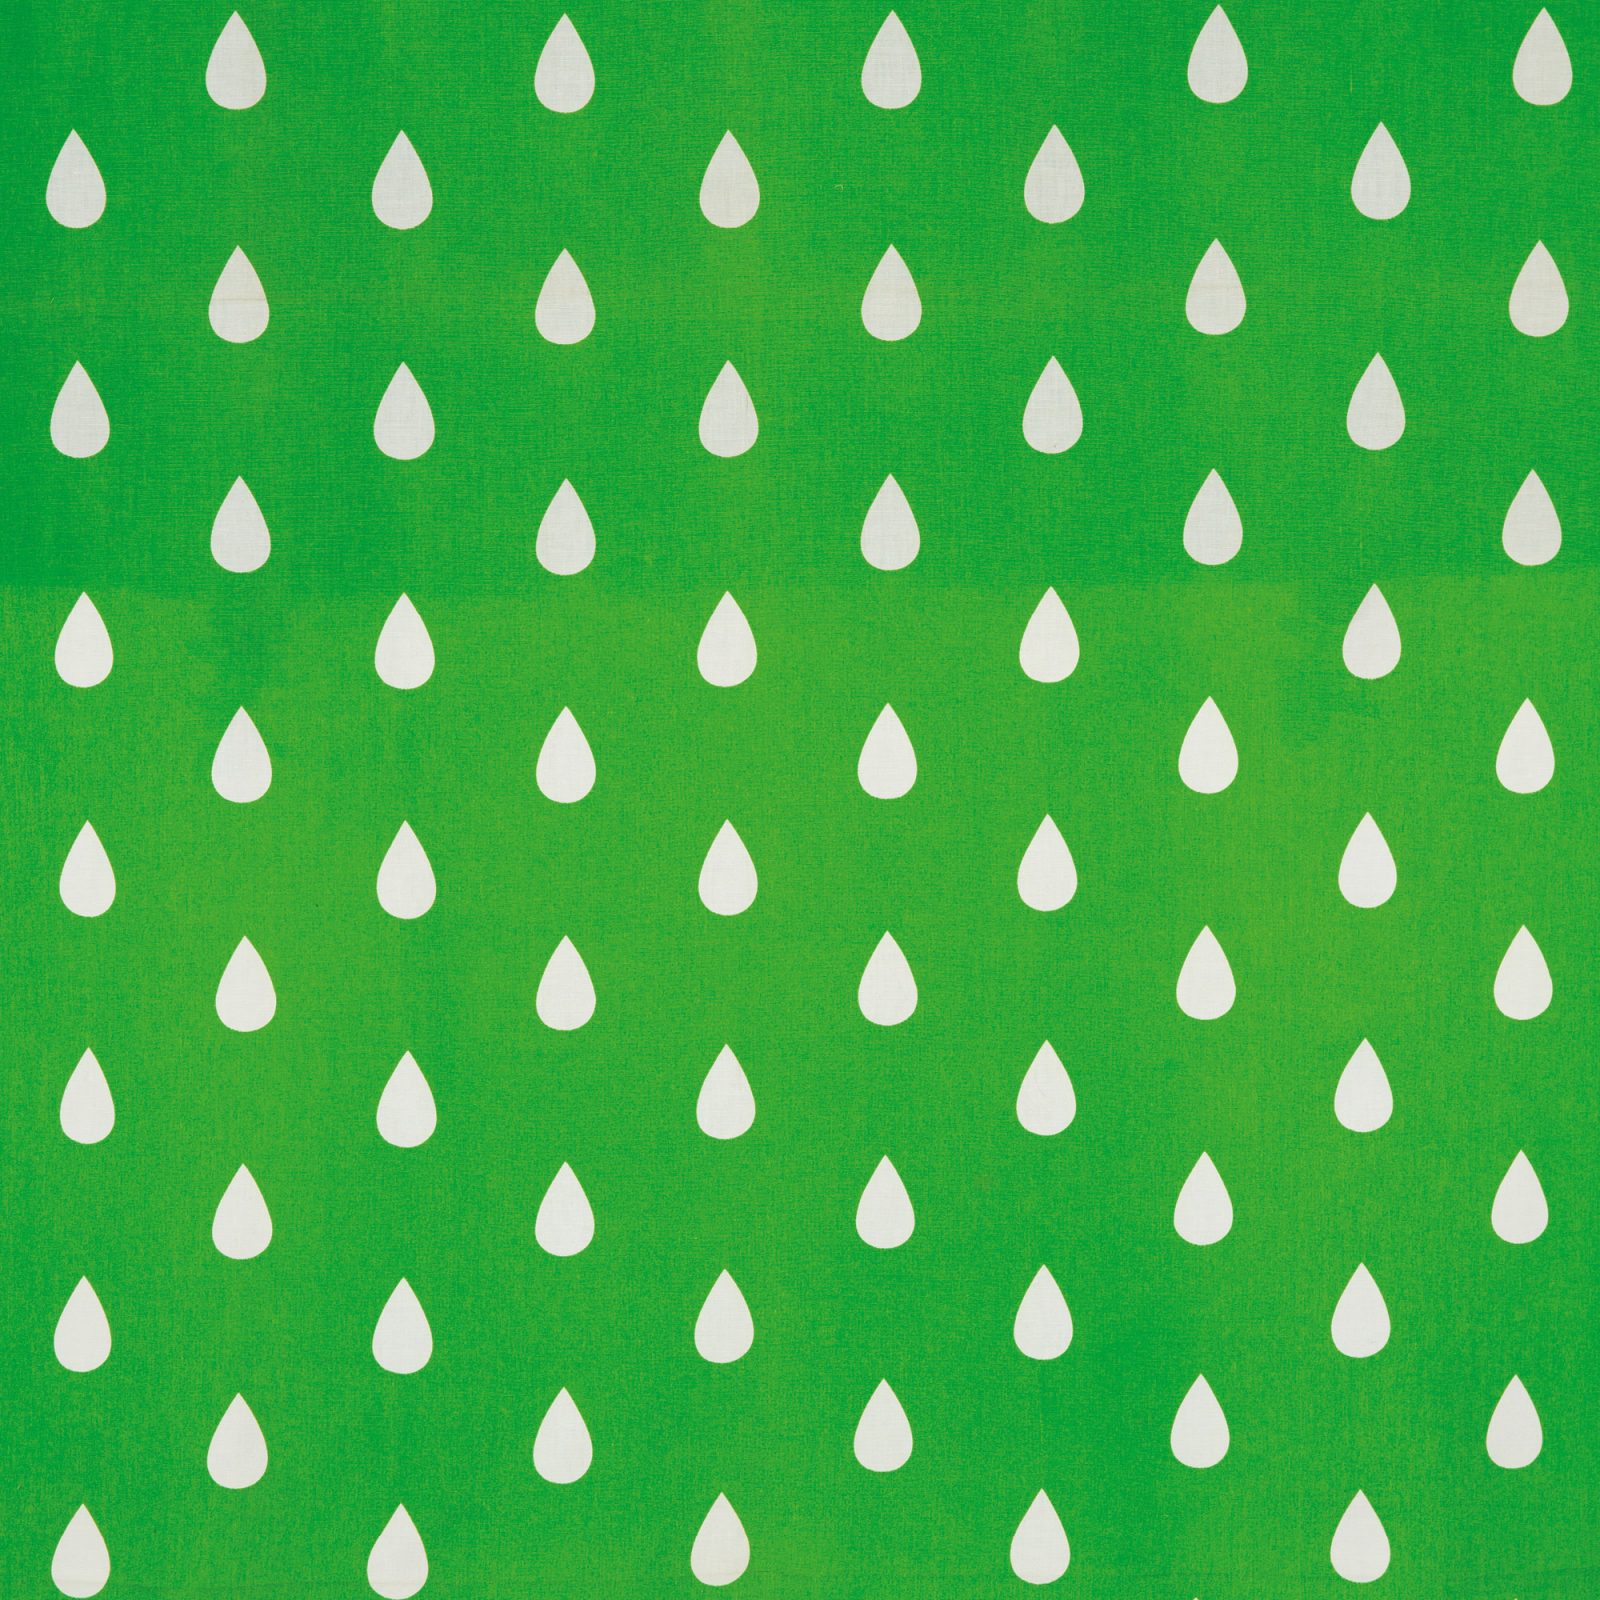 Teardrop-patterned textile, green and white, SOLREGN.